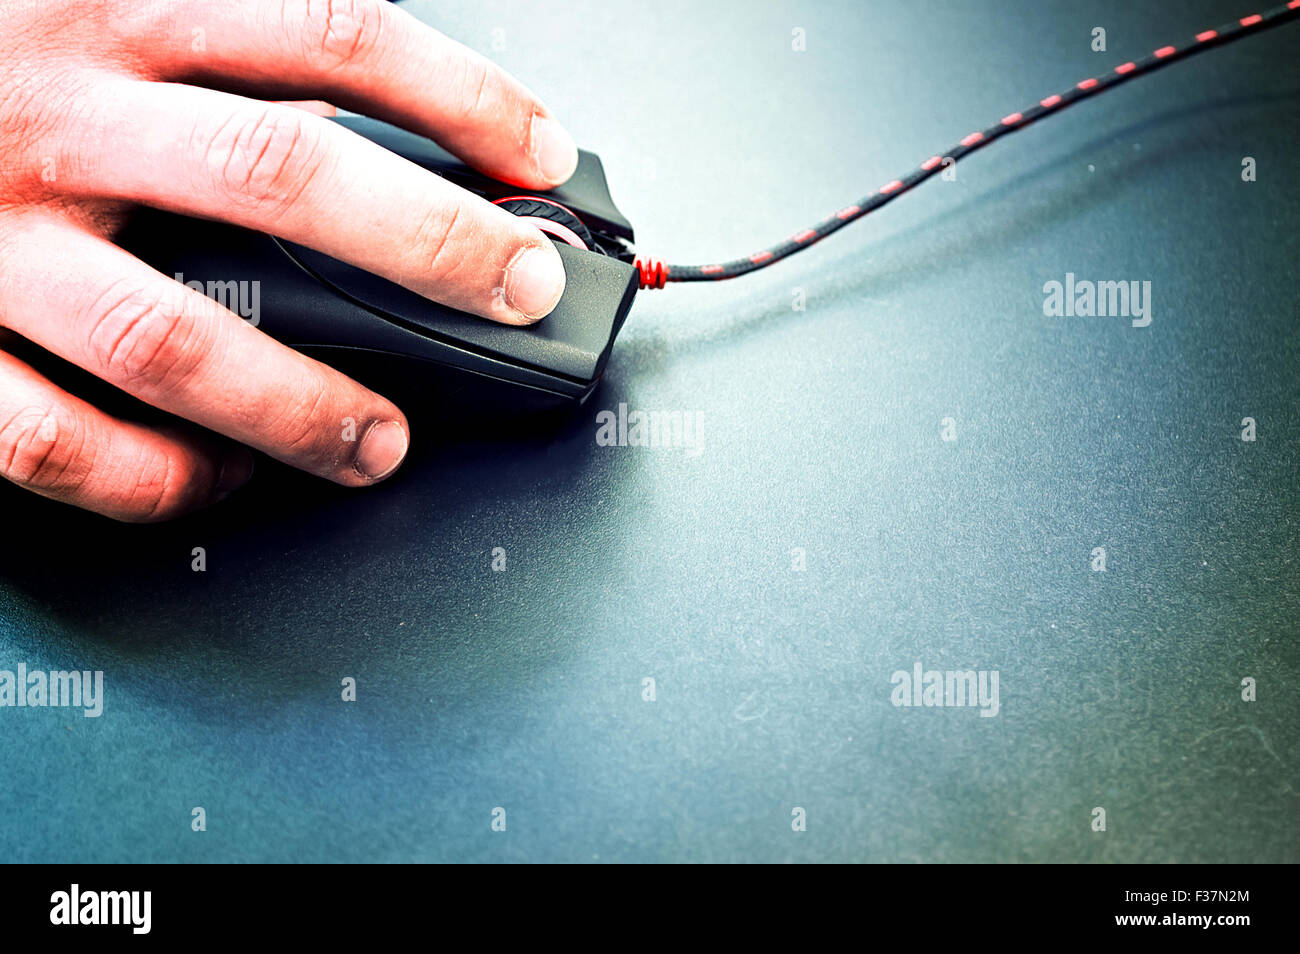 Male hand holding computer mouse on black surface. Computer technology conceptual image. Stock Photo